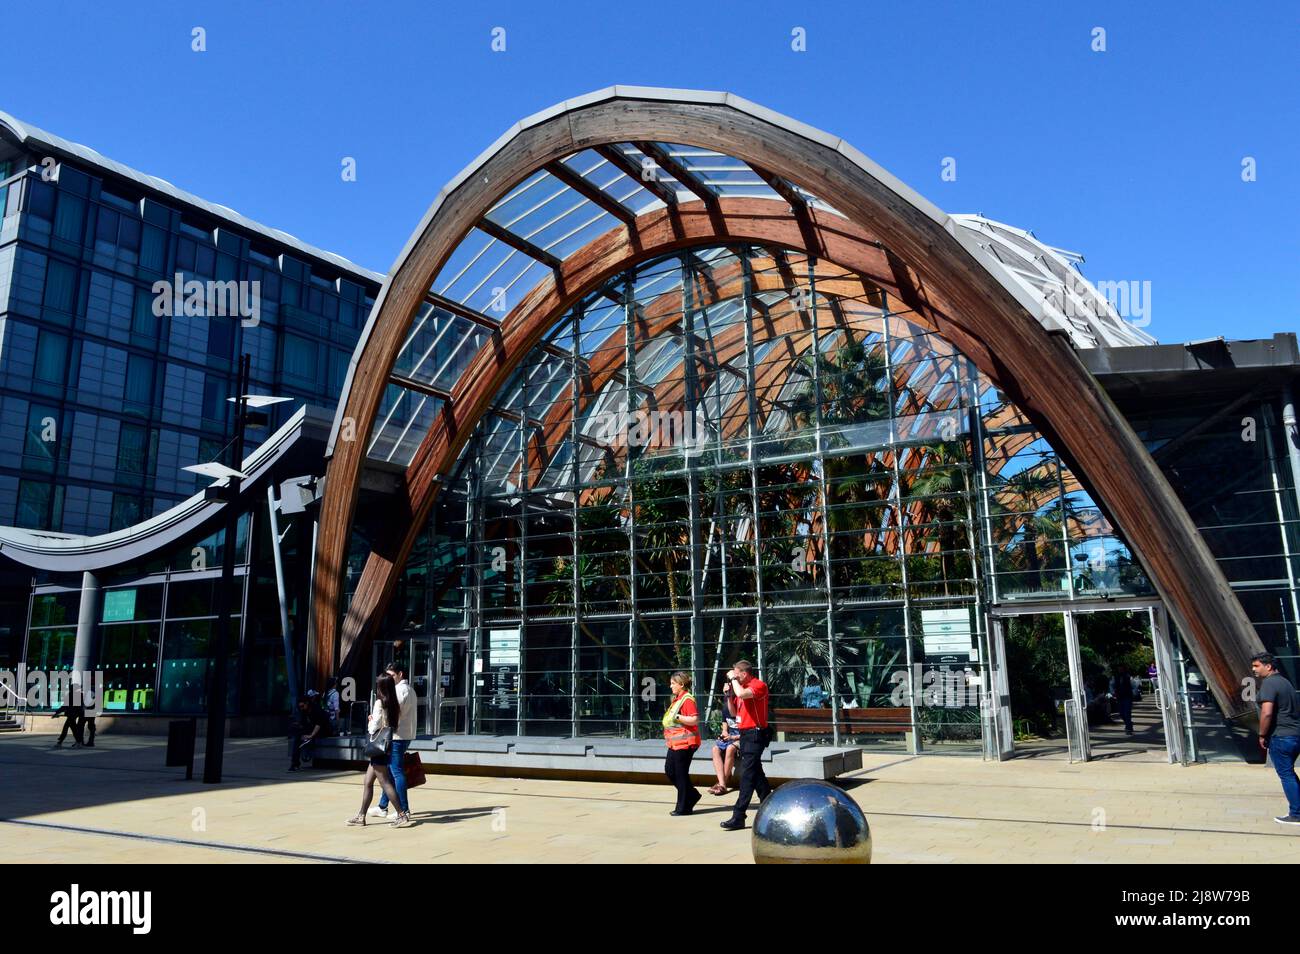 SHEFFIELD. SOUTH YORKSHIRE. ENGLAND. 05-14-22. The entrance to the Winter Gardens on St. Pauls Place. Stock Photo